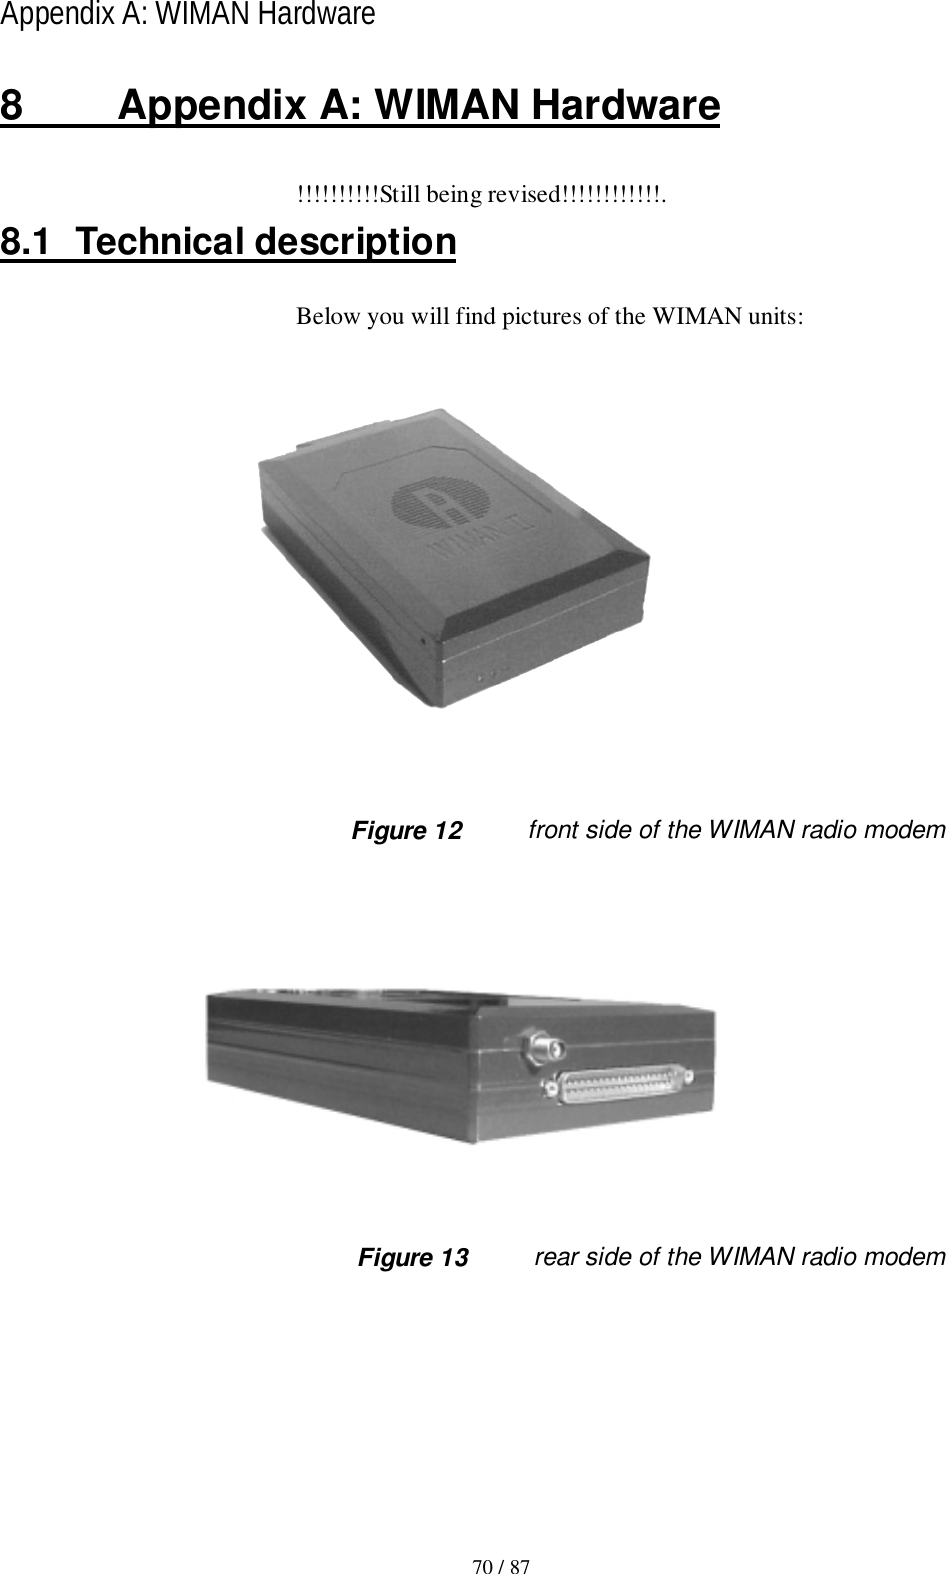 70 / 87Appendix A: WIMAN Hardware8  Appendix A: WIMAN Hardware!!!!!!!!!!Still being revised!!!!!!!!!!!!.8.1 Technical descriptionBelow you will find pictures of the WIMAN units: Figure 12 front side of the WIMAN radio modem Figure 13 rear side of the WIMAN radio modem